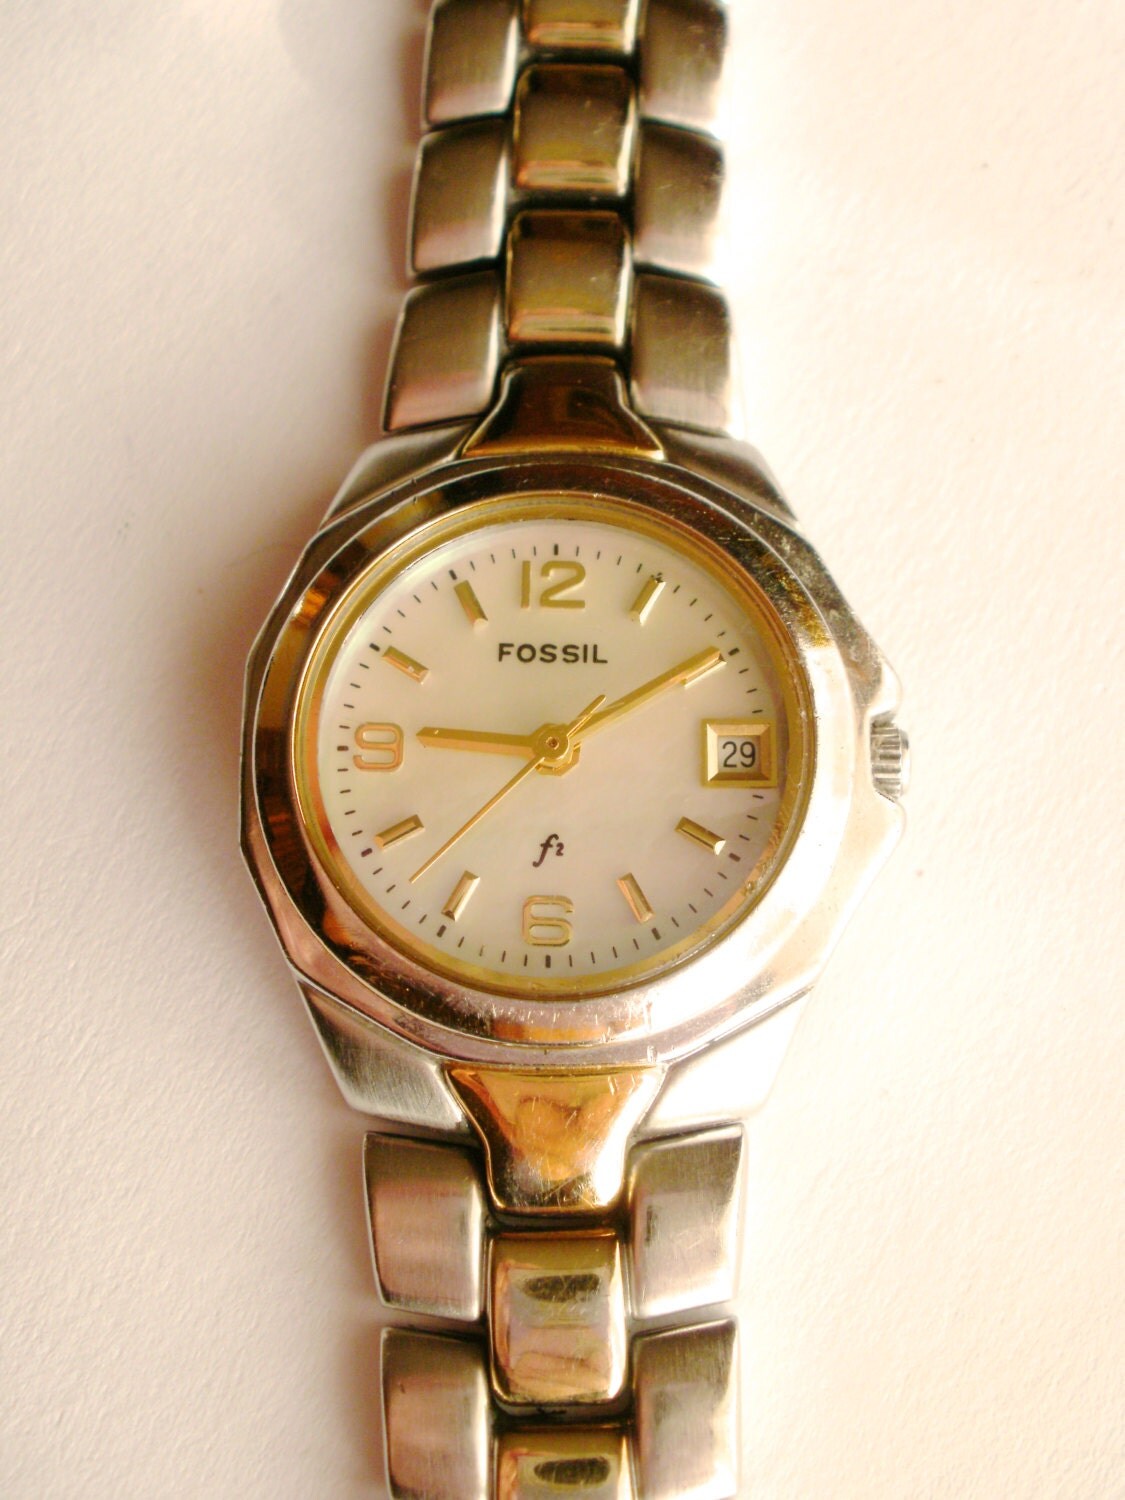 FOSSIL F2 Gold and Silver Ladies Quartz Wrist by AutomatonJourney